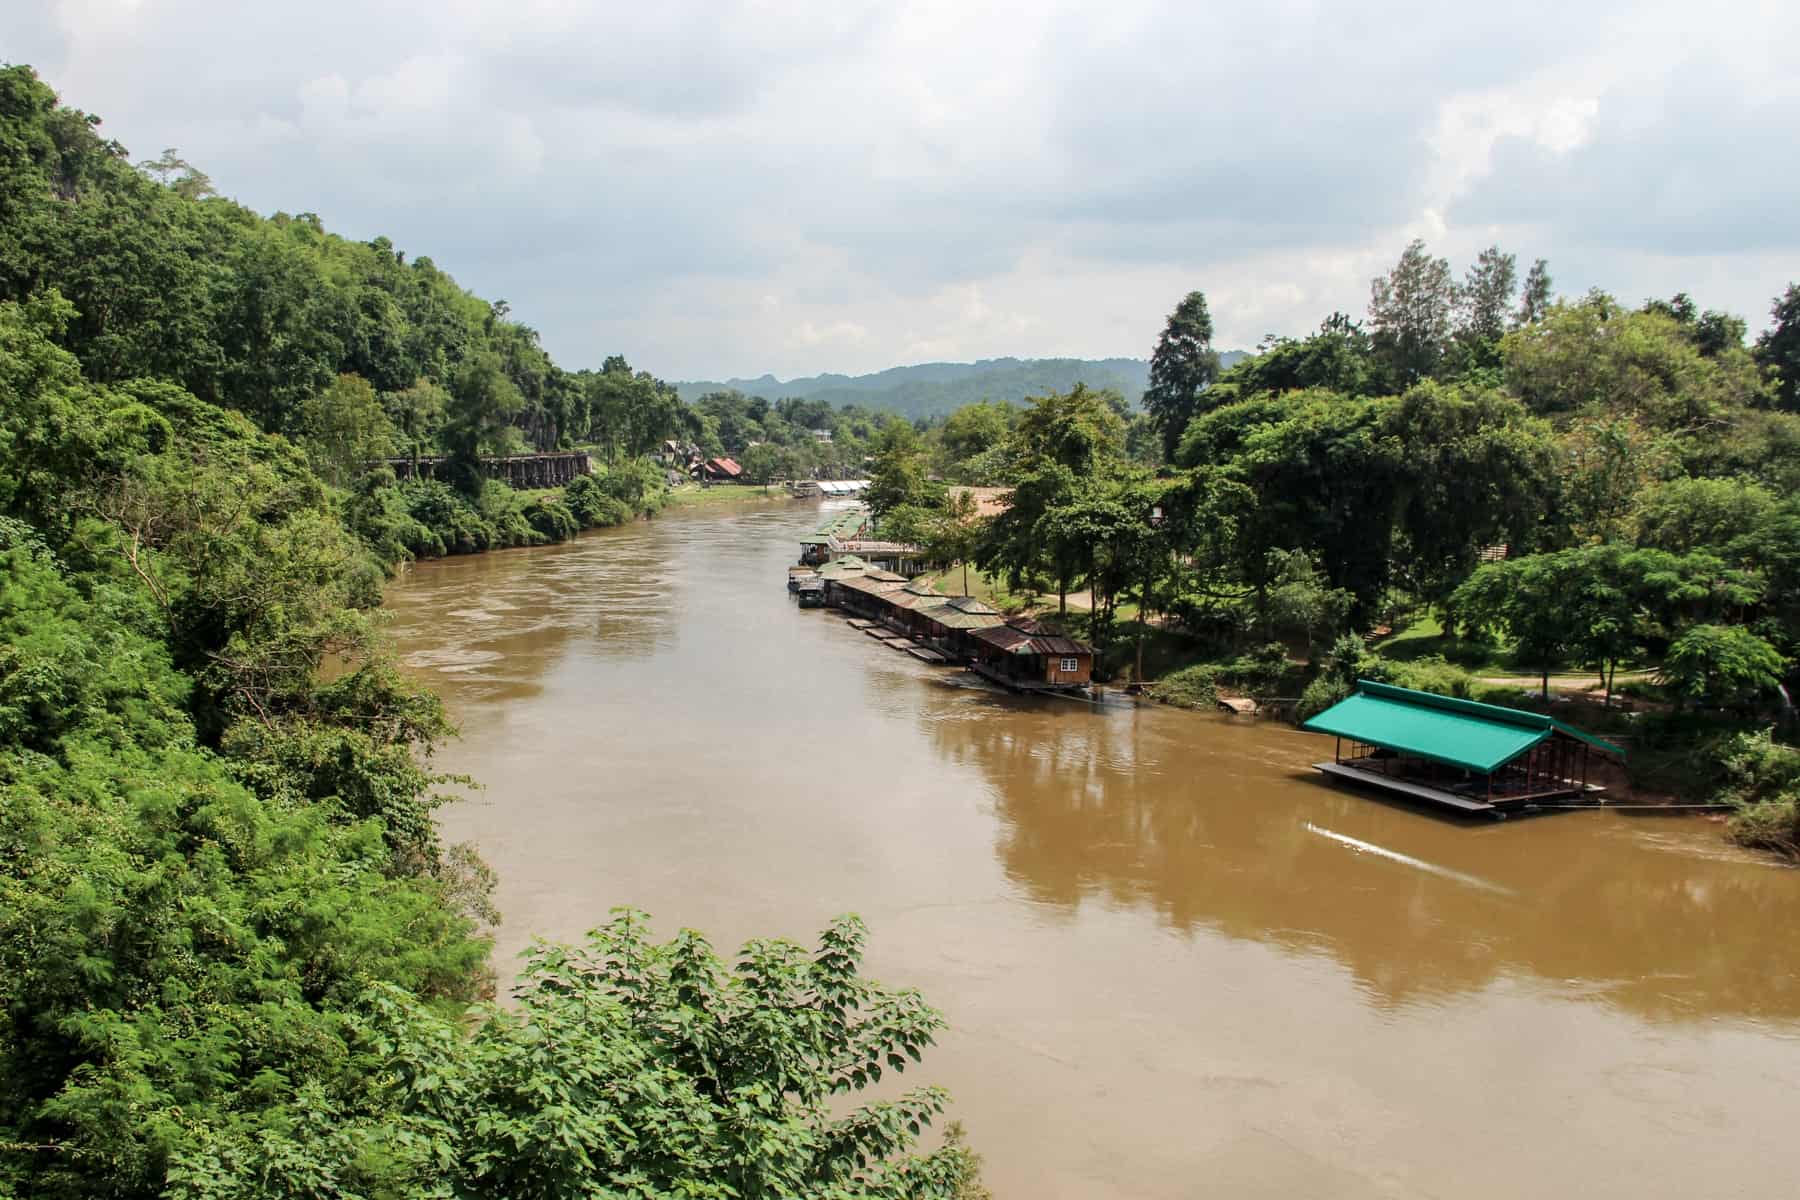 The brown river with floating huts and jungle green valley in Kanchanaburi Province in Thailand.